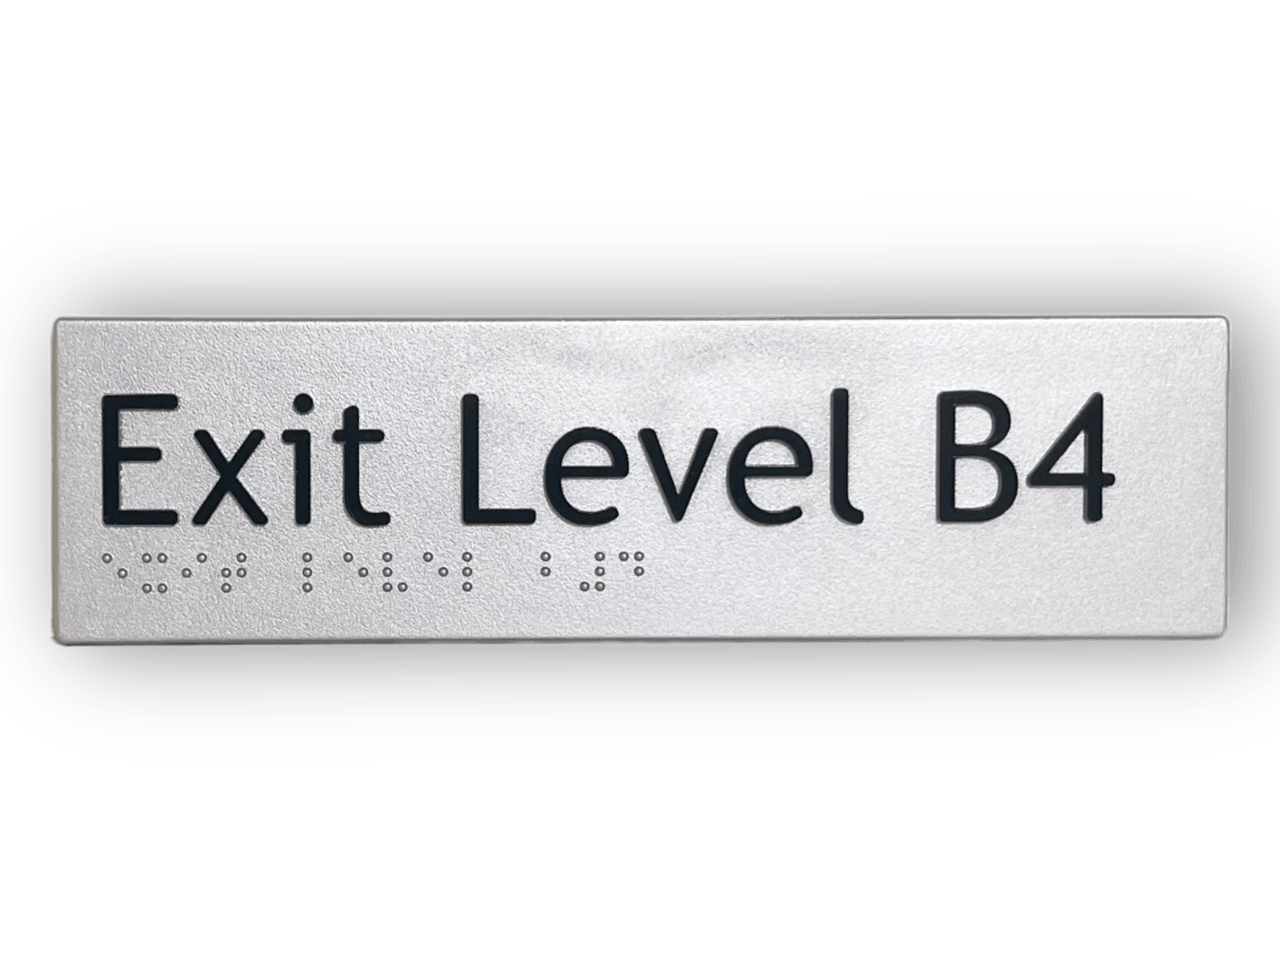 BRAILLE EXIT LEVEL B4 SIGN